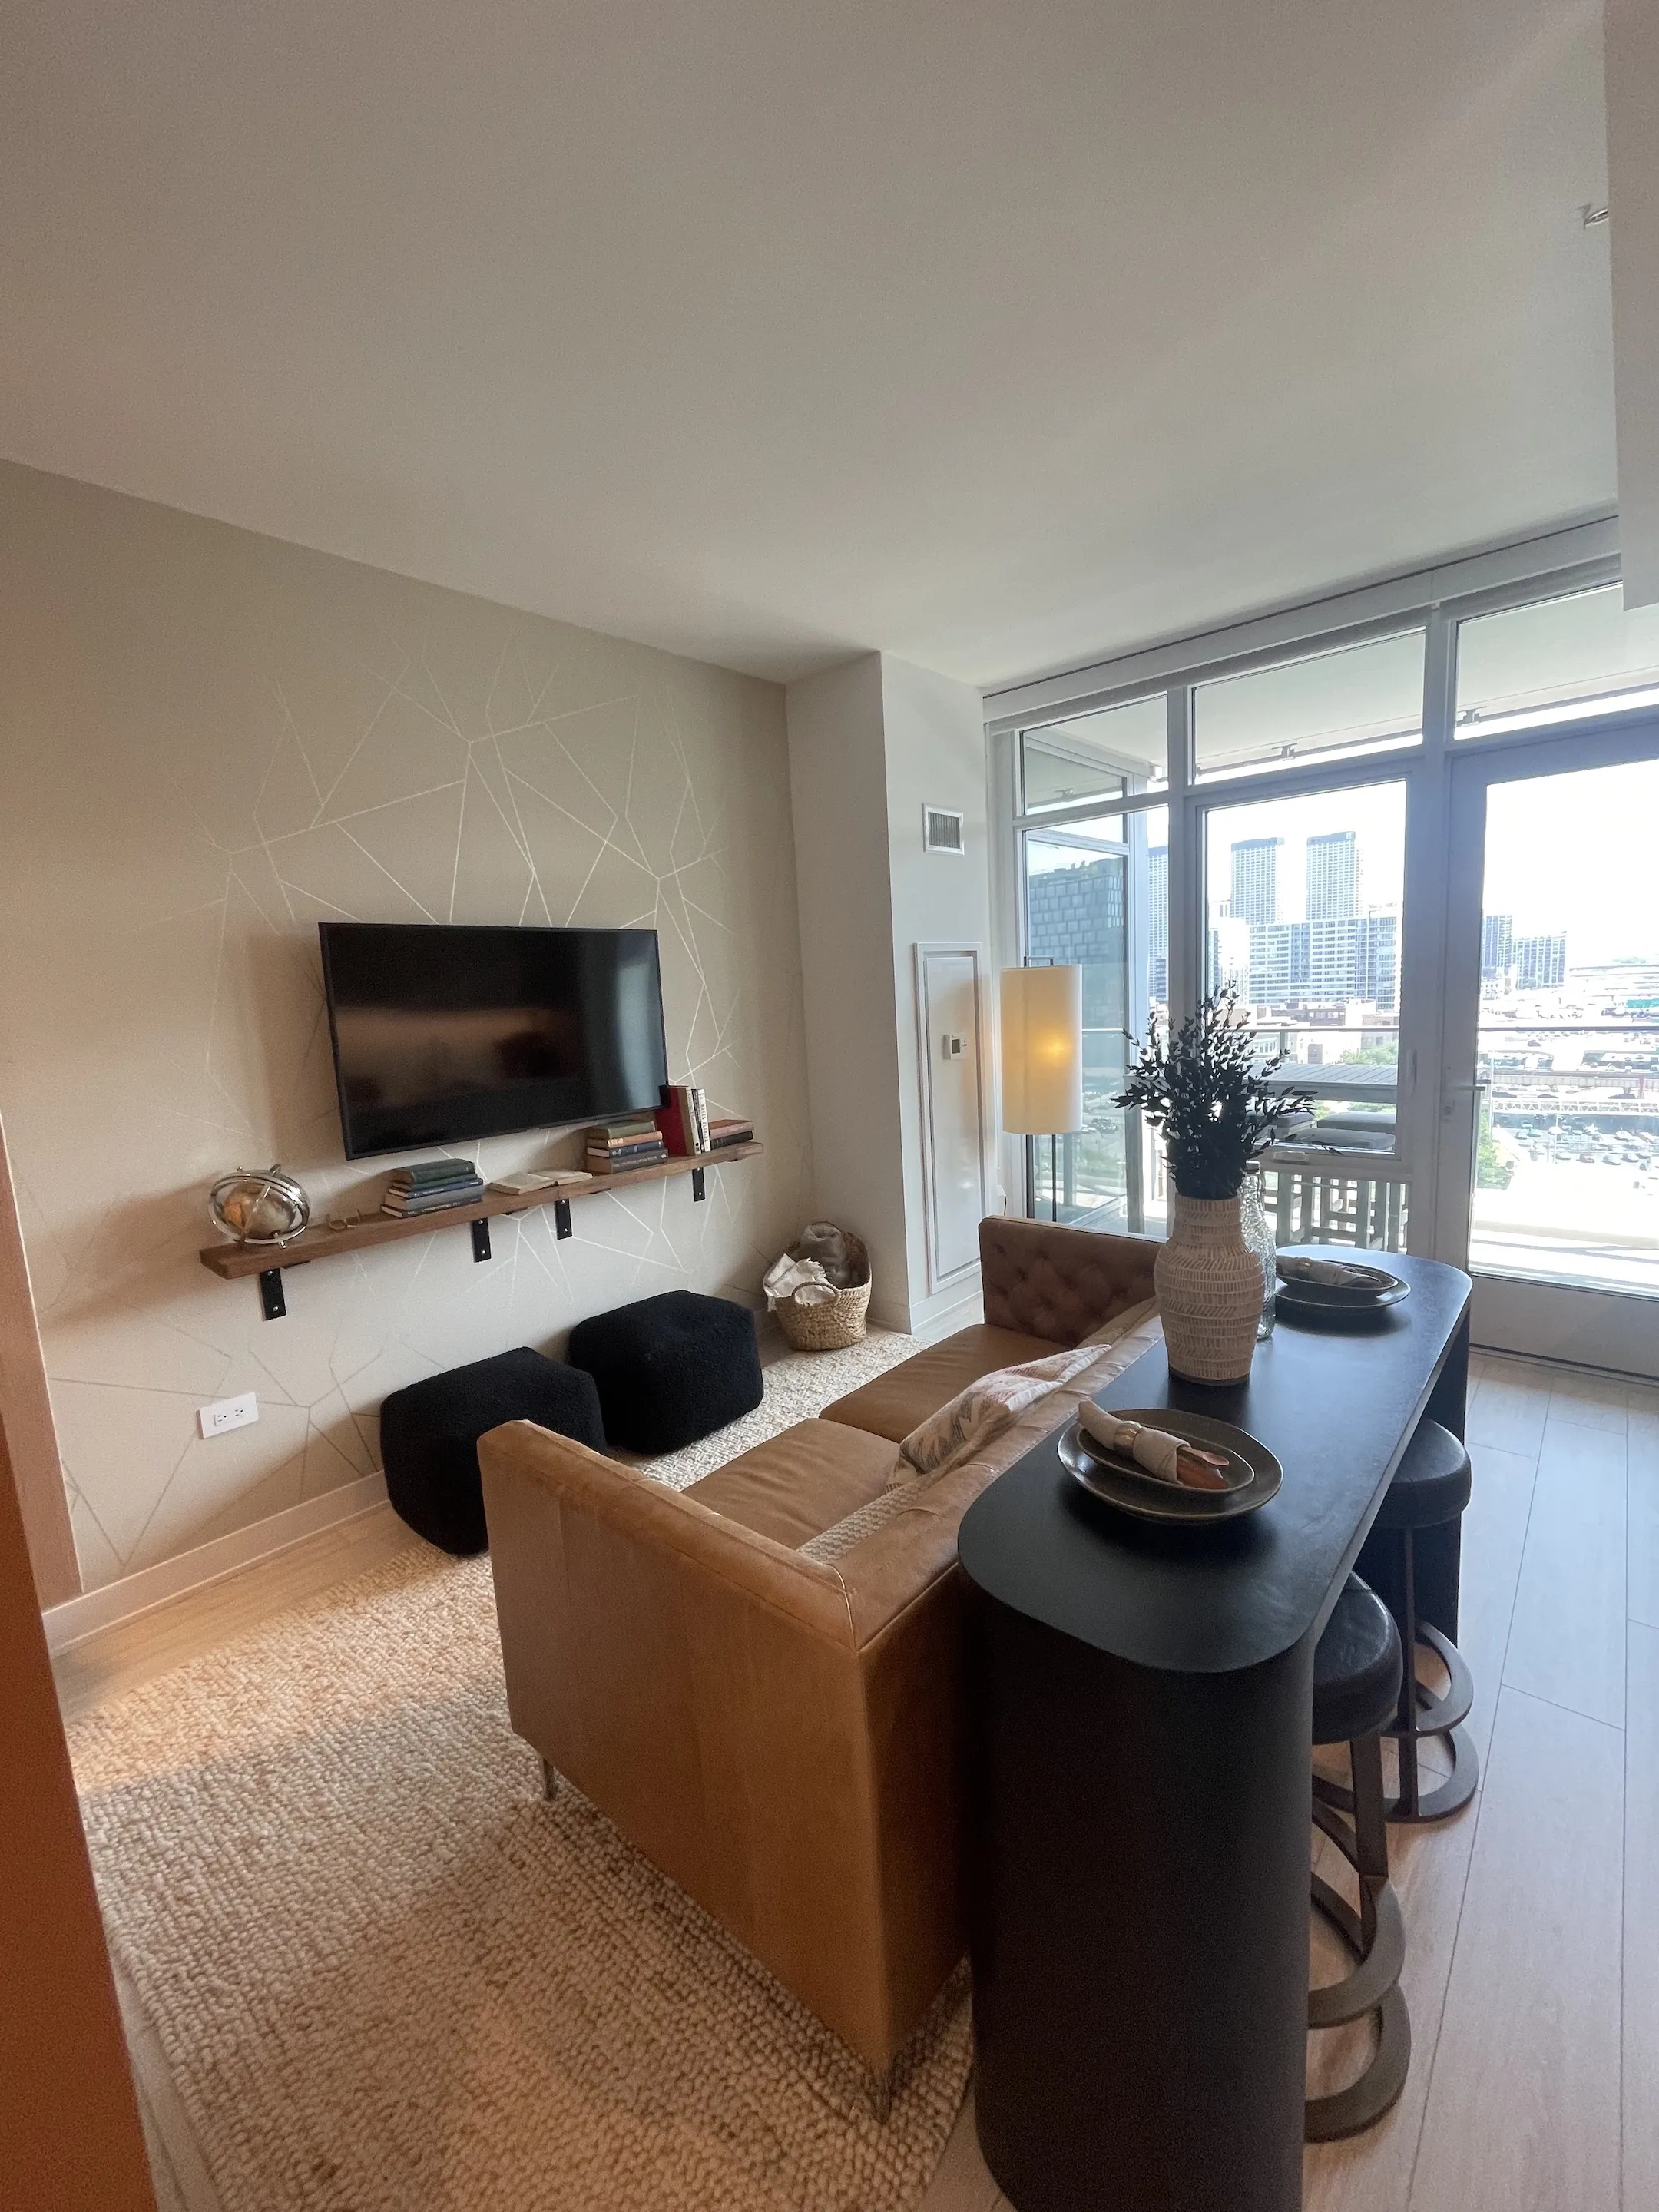 355 N HALSTED ST 60661-unit#A2907-Chicago-IL